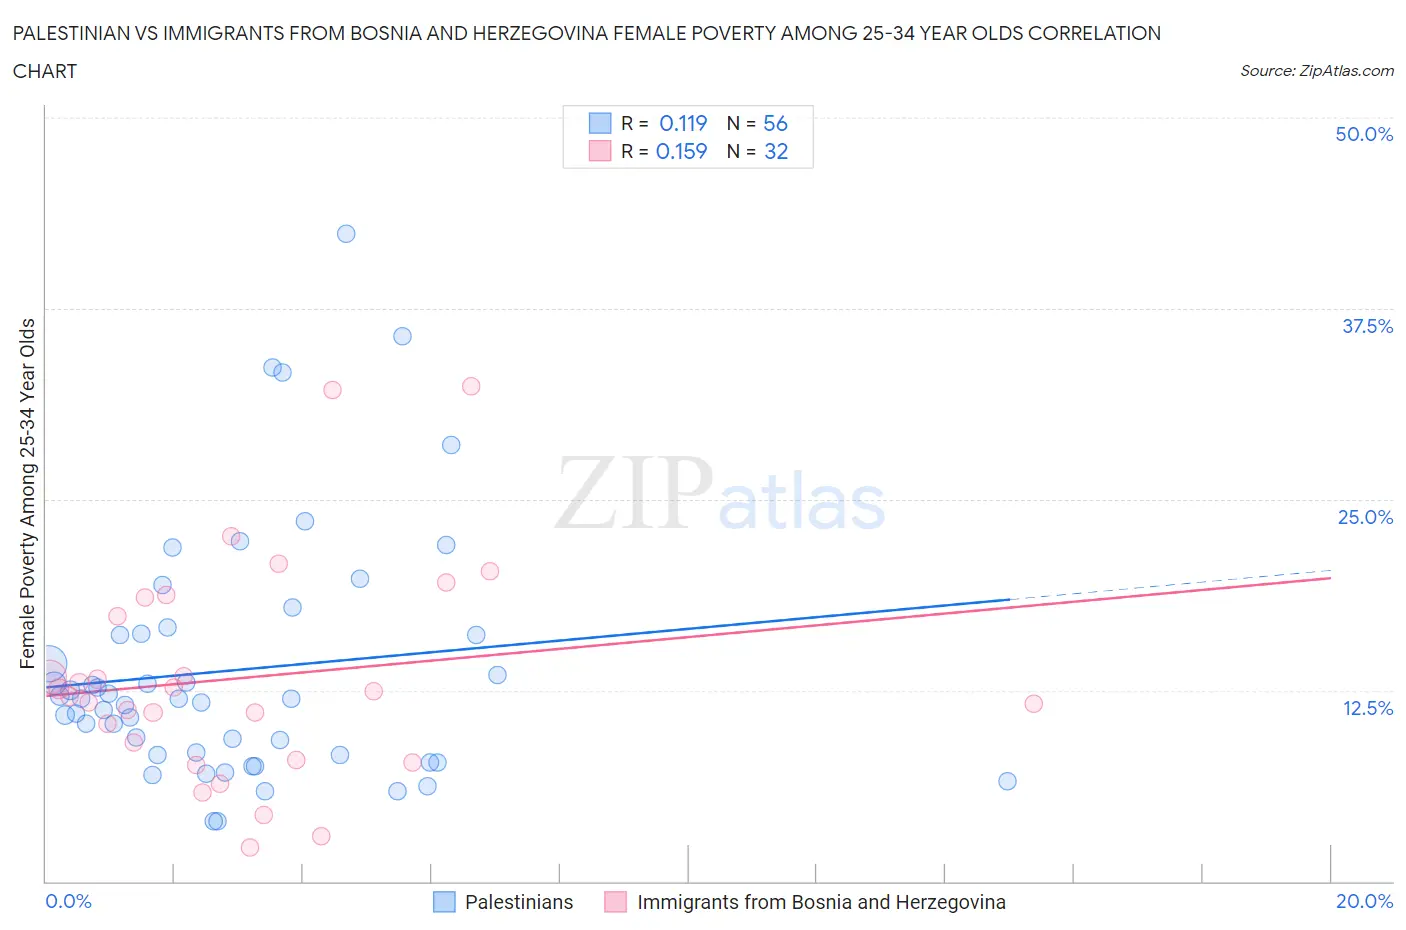 Palestinian vs Immigrants from Bosnia and Herzegovina Female Poverty Among 25-34 Year Olds